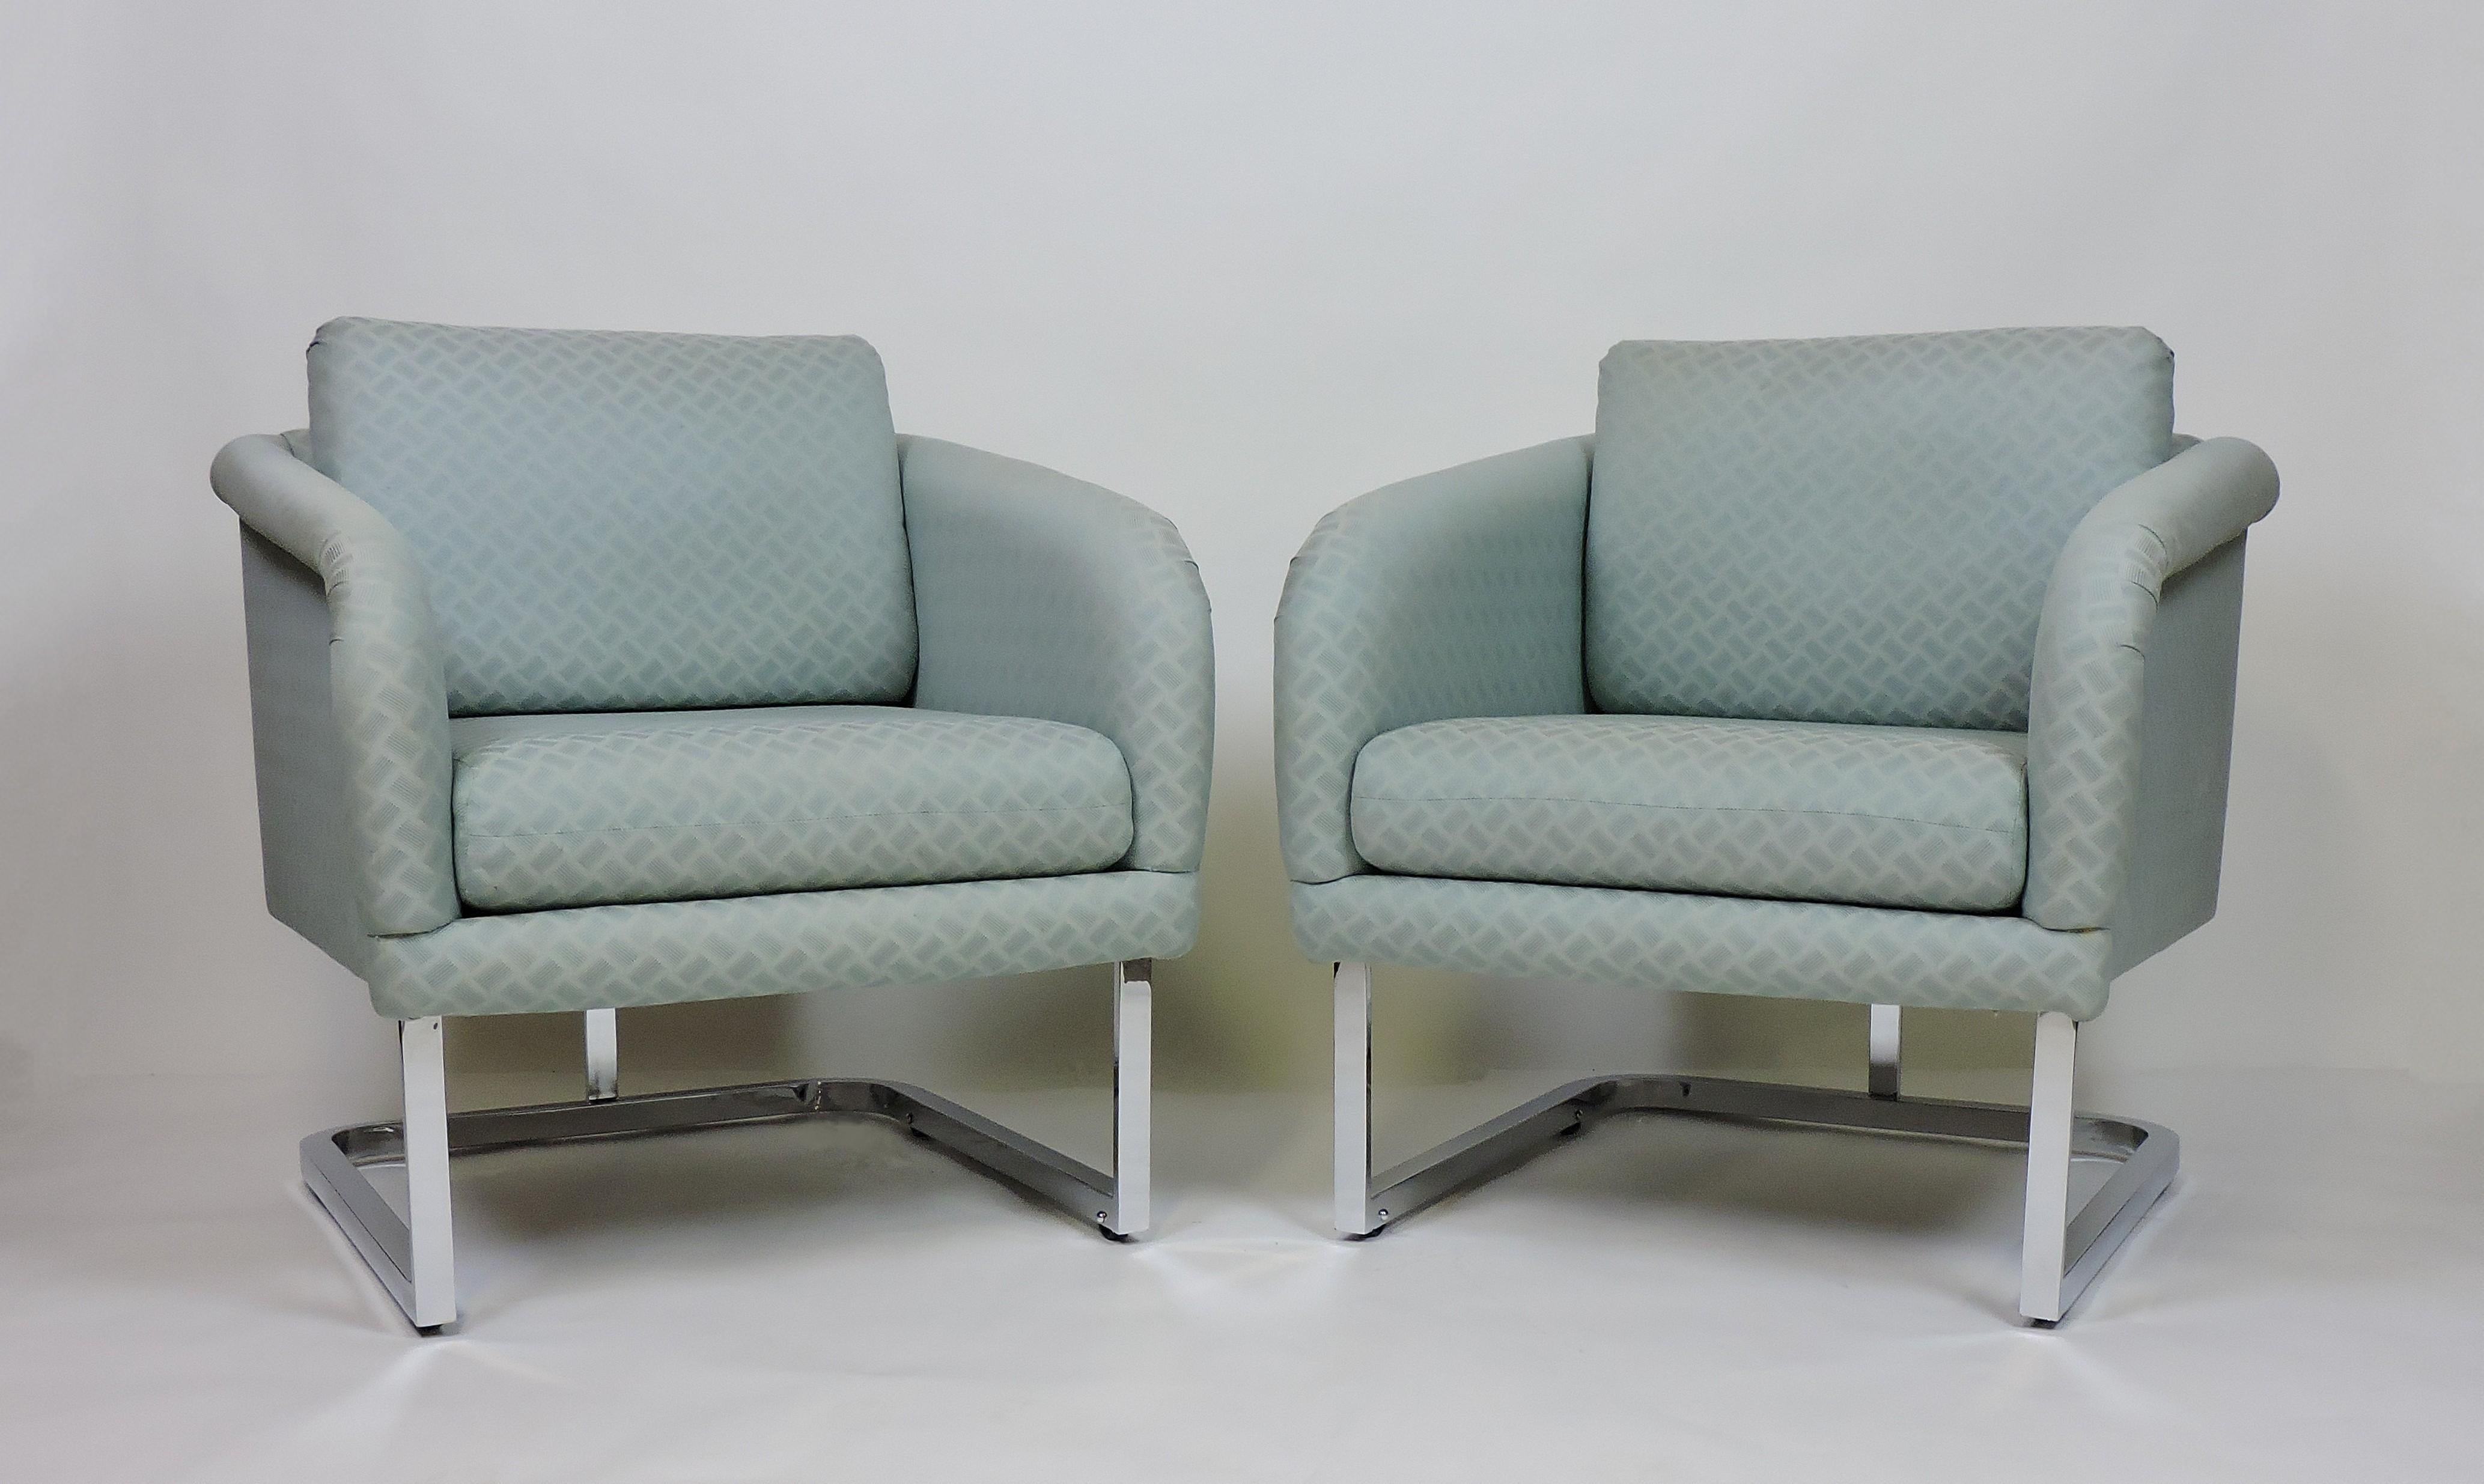 Beautiful pair of lounge chairs manufactured by high quality furniture maker, Thayer Coggin. These chairs are very well constructed and have chrome bases with hidden wheels which makes them easy to move. They have the original pale green fabric and